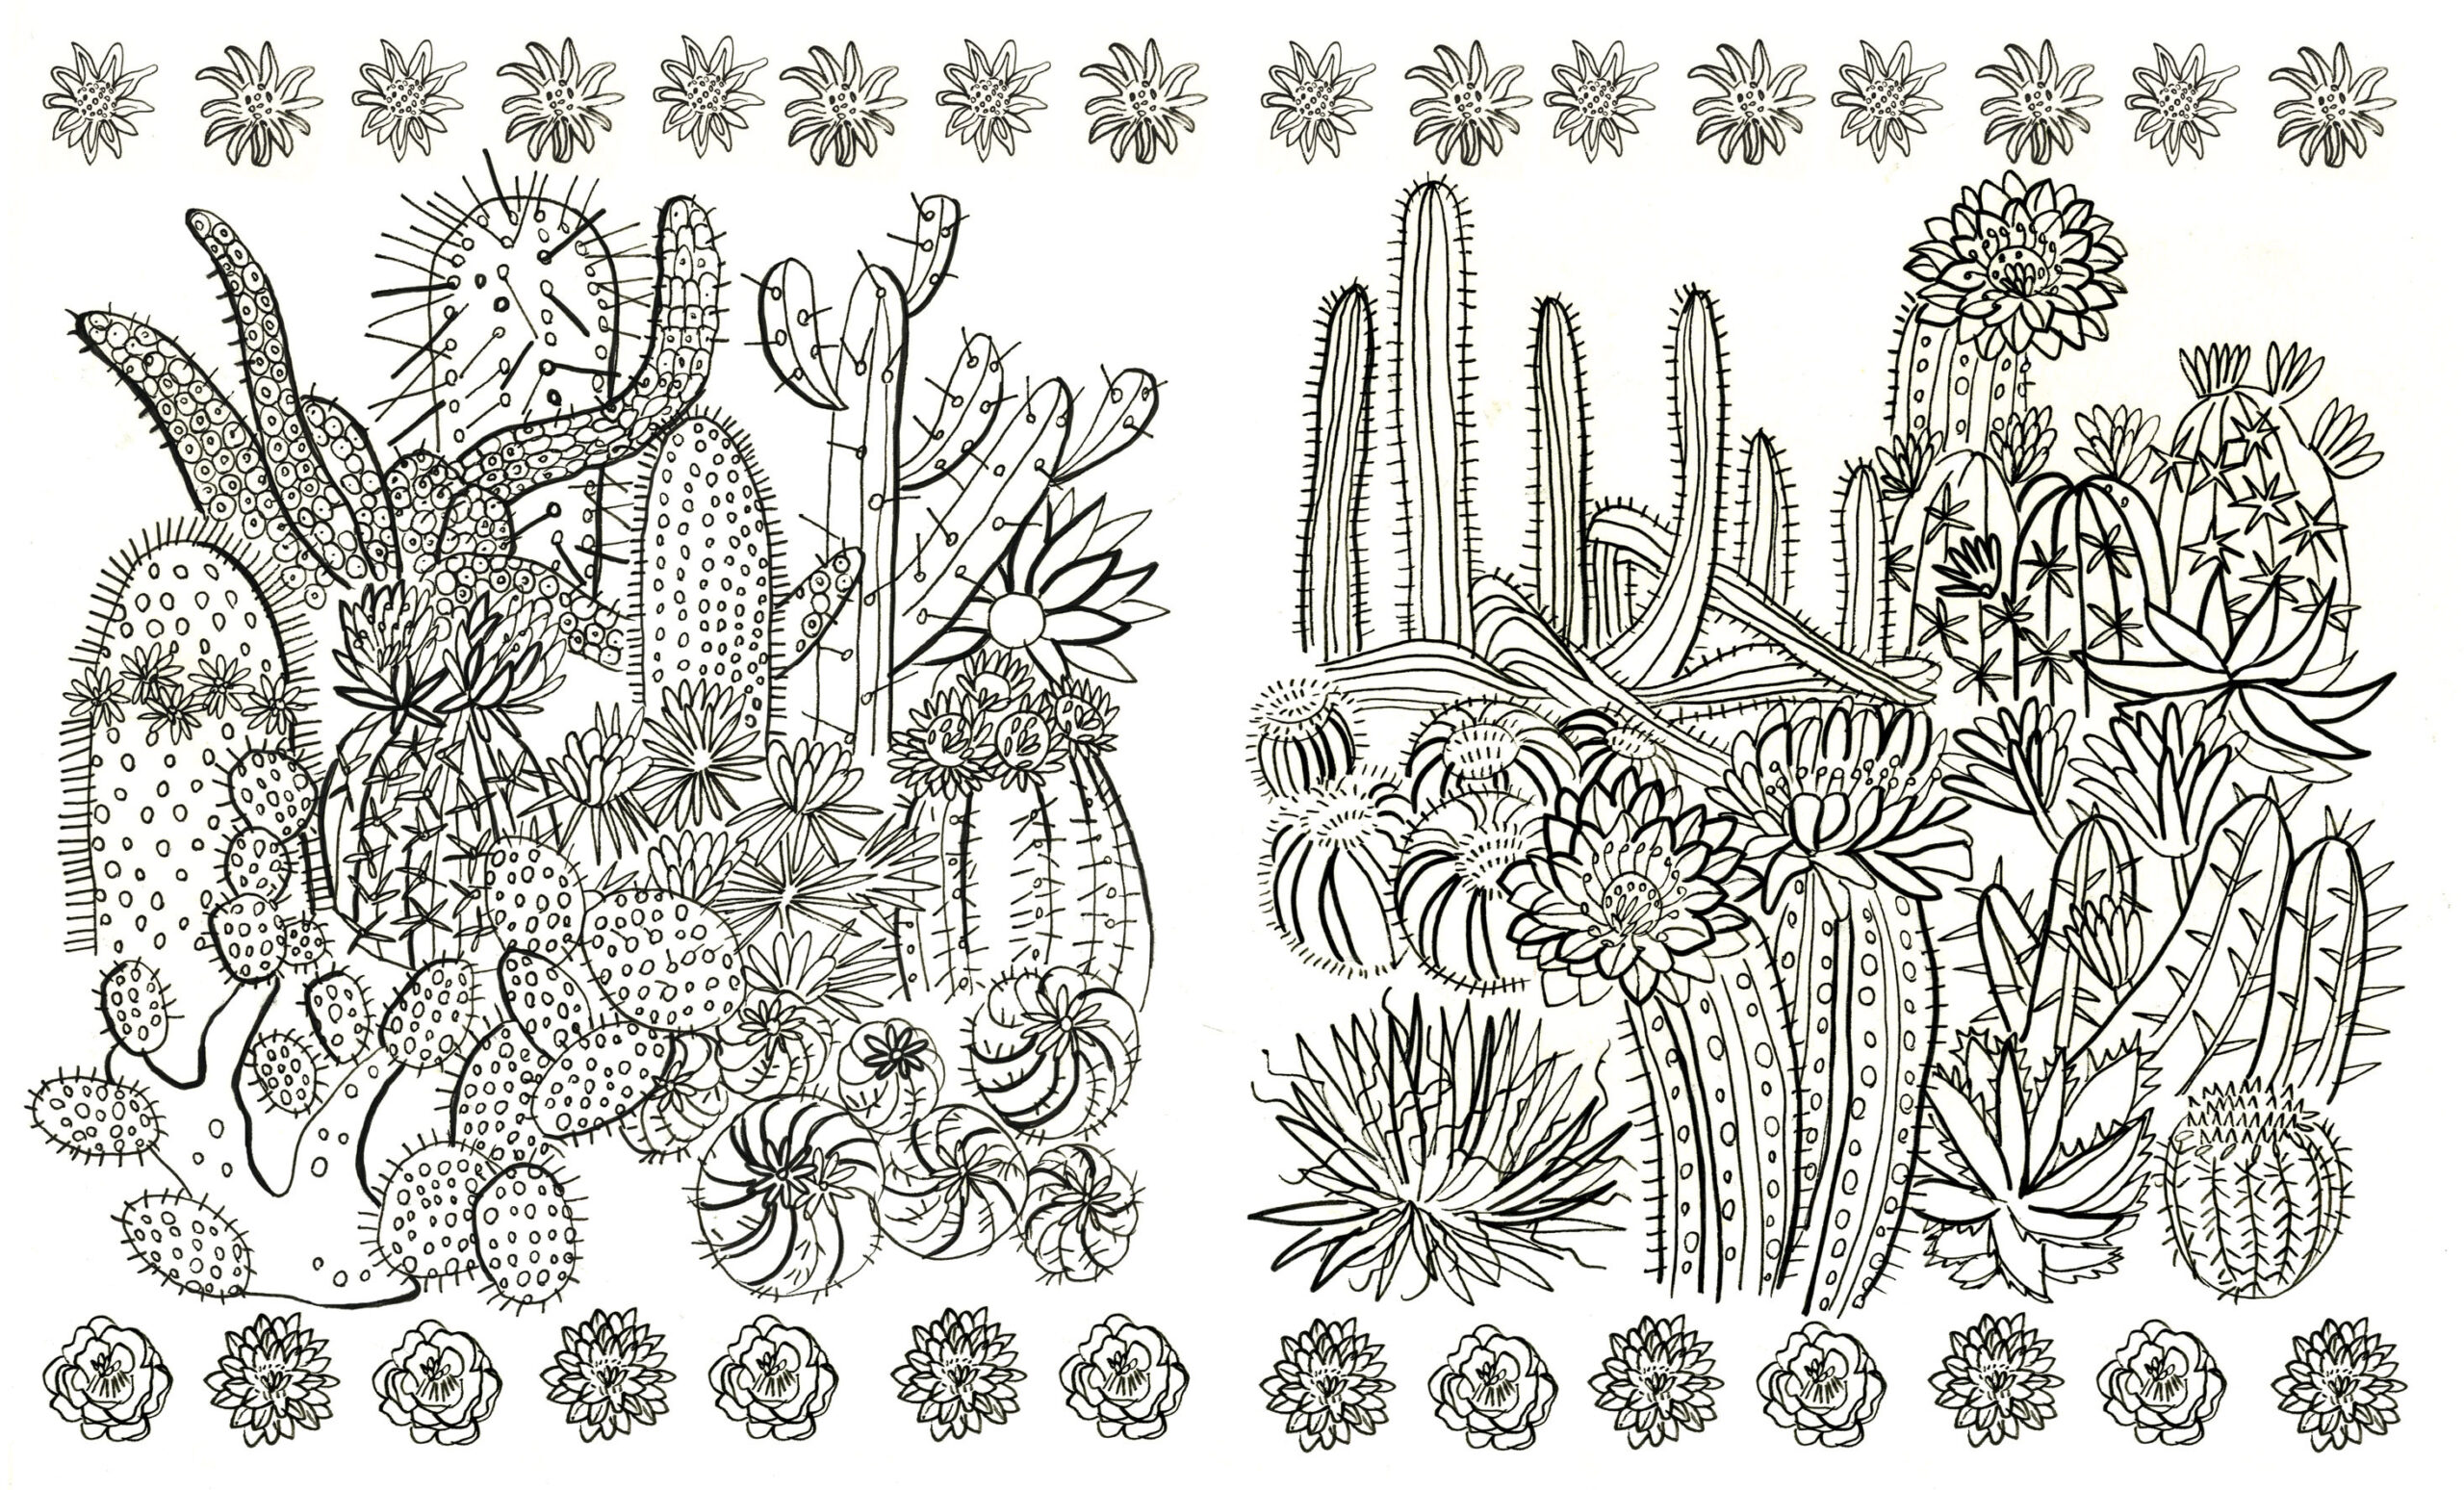 Kew Colouring Book Clair Rossiter Illustration intended for Kew Book Of Botanical Illustration